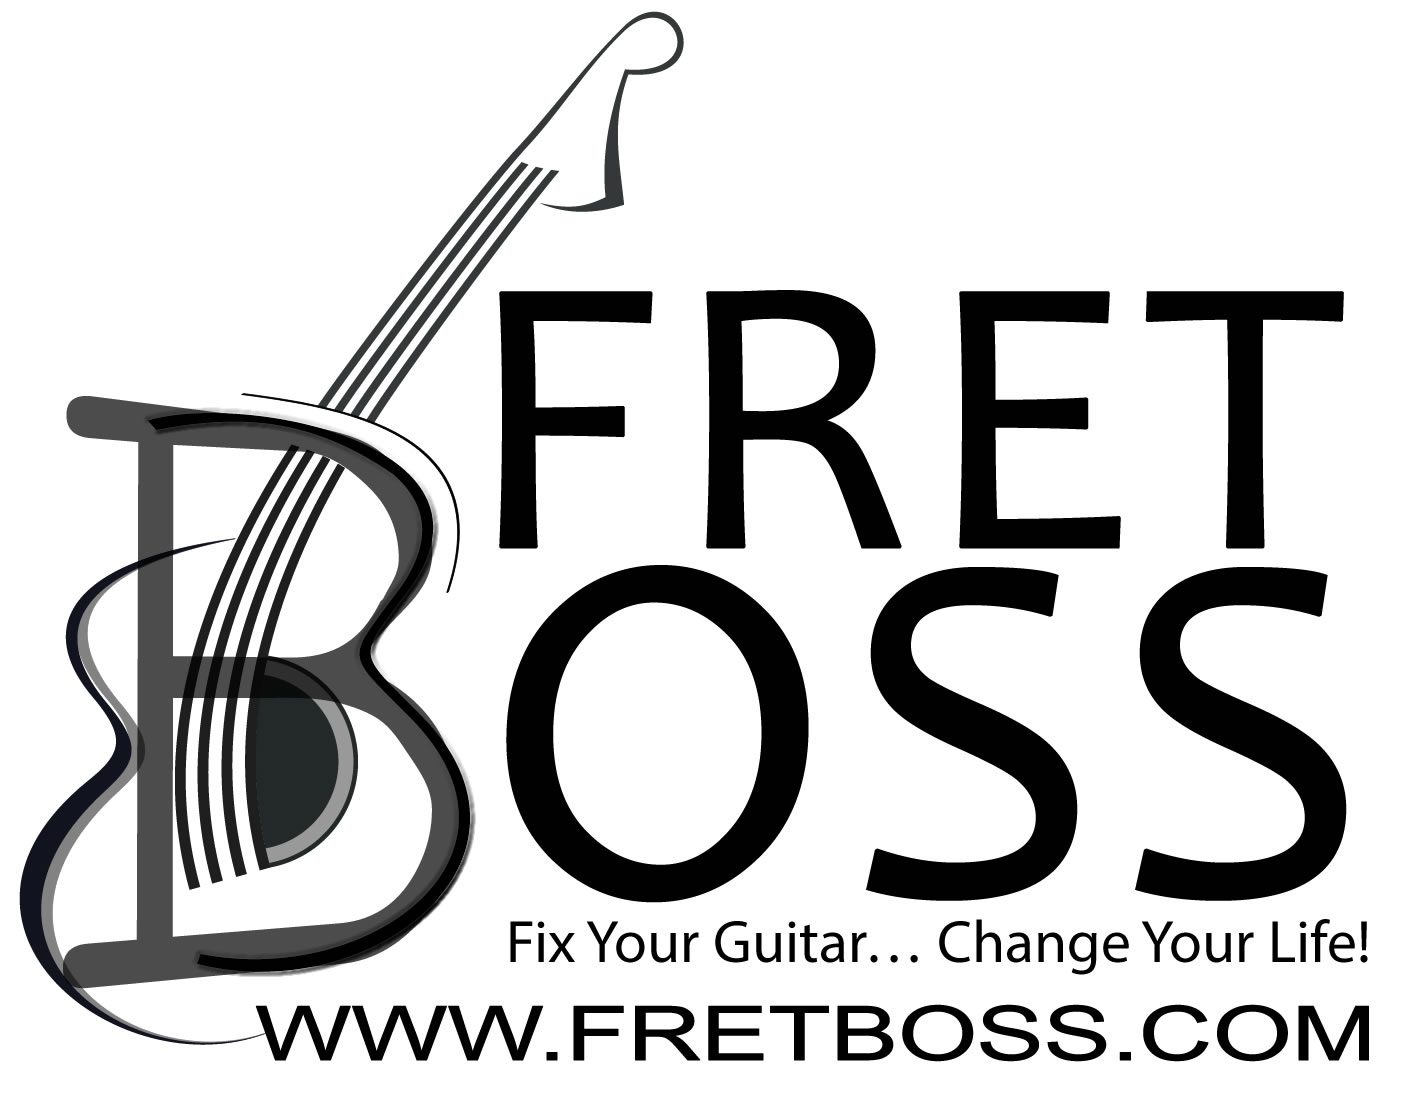 Fret Boss Guitar Works: Fix Your Guitar Change Your Life